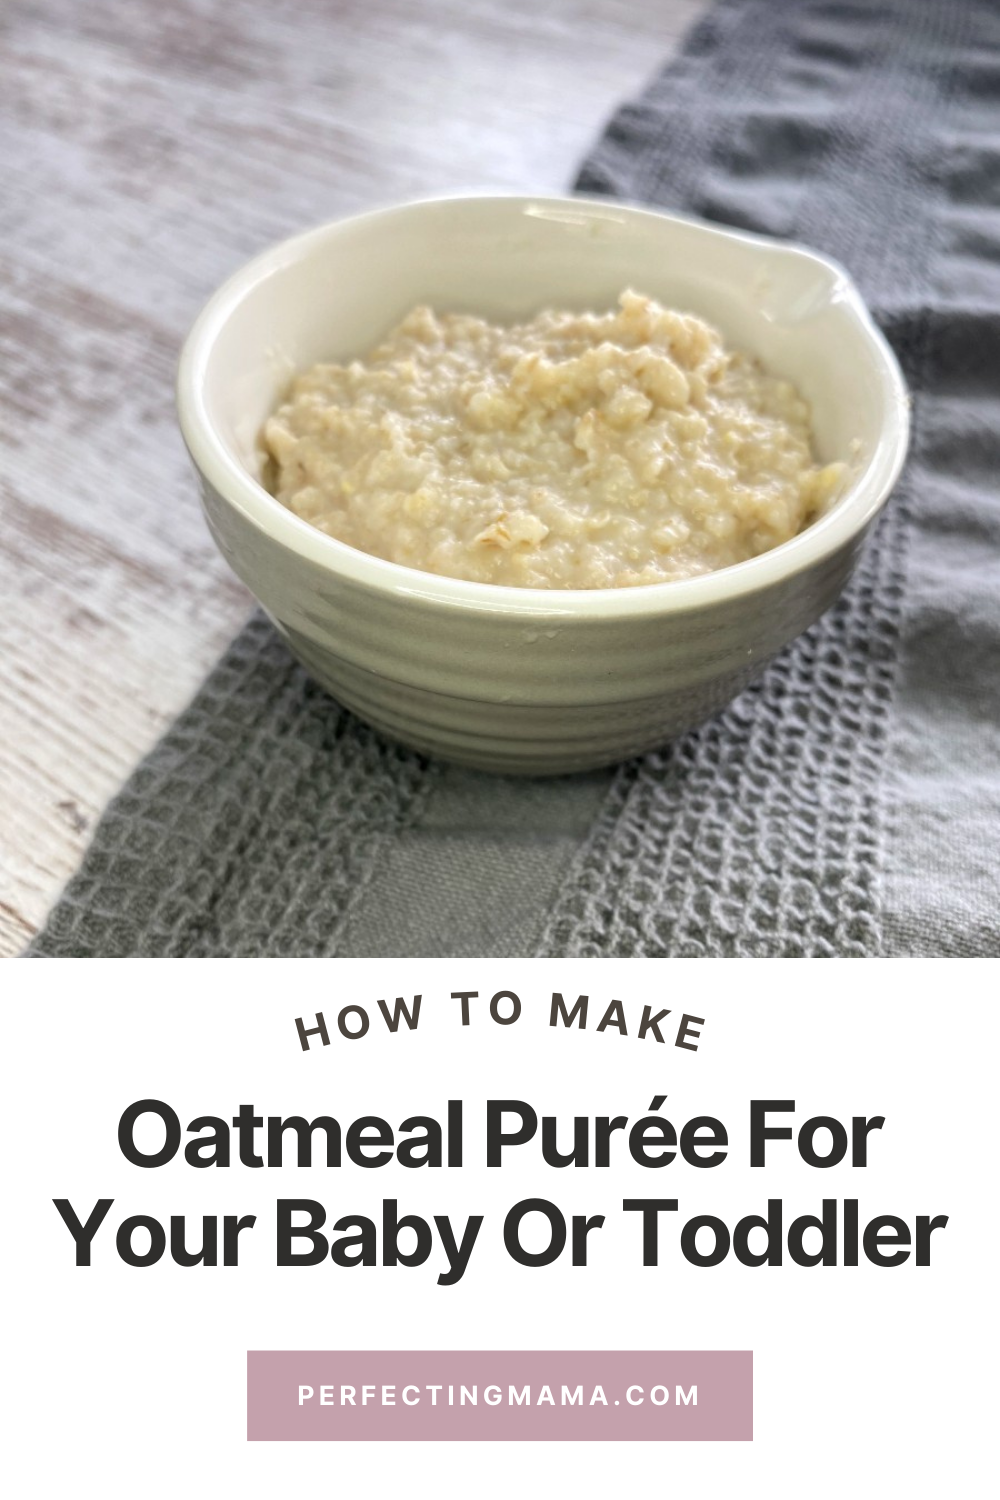 How To Make Oatmeal Purée For Your Baby Or Toddler